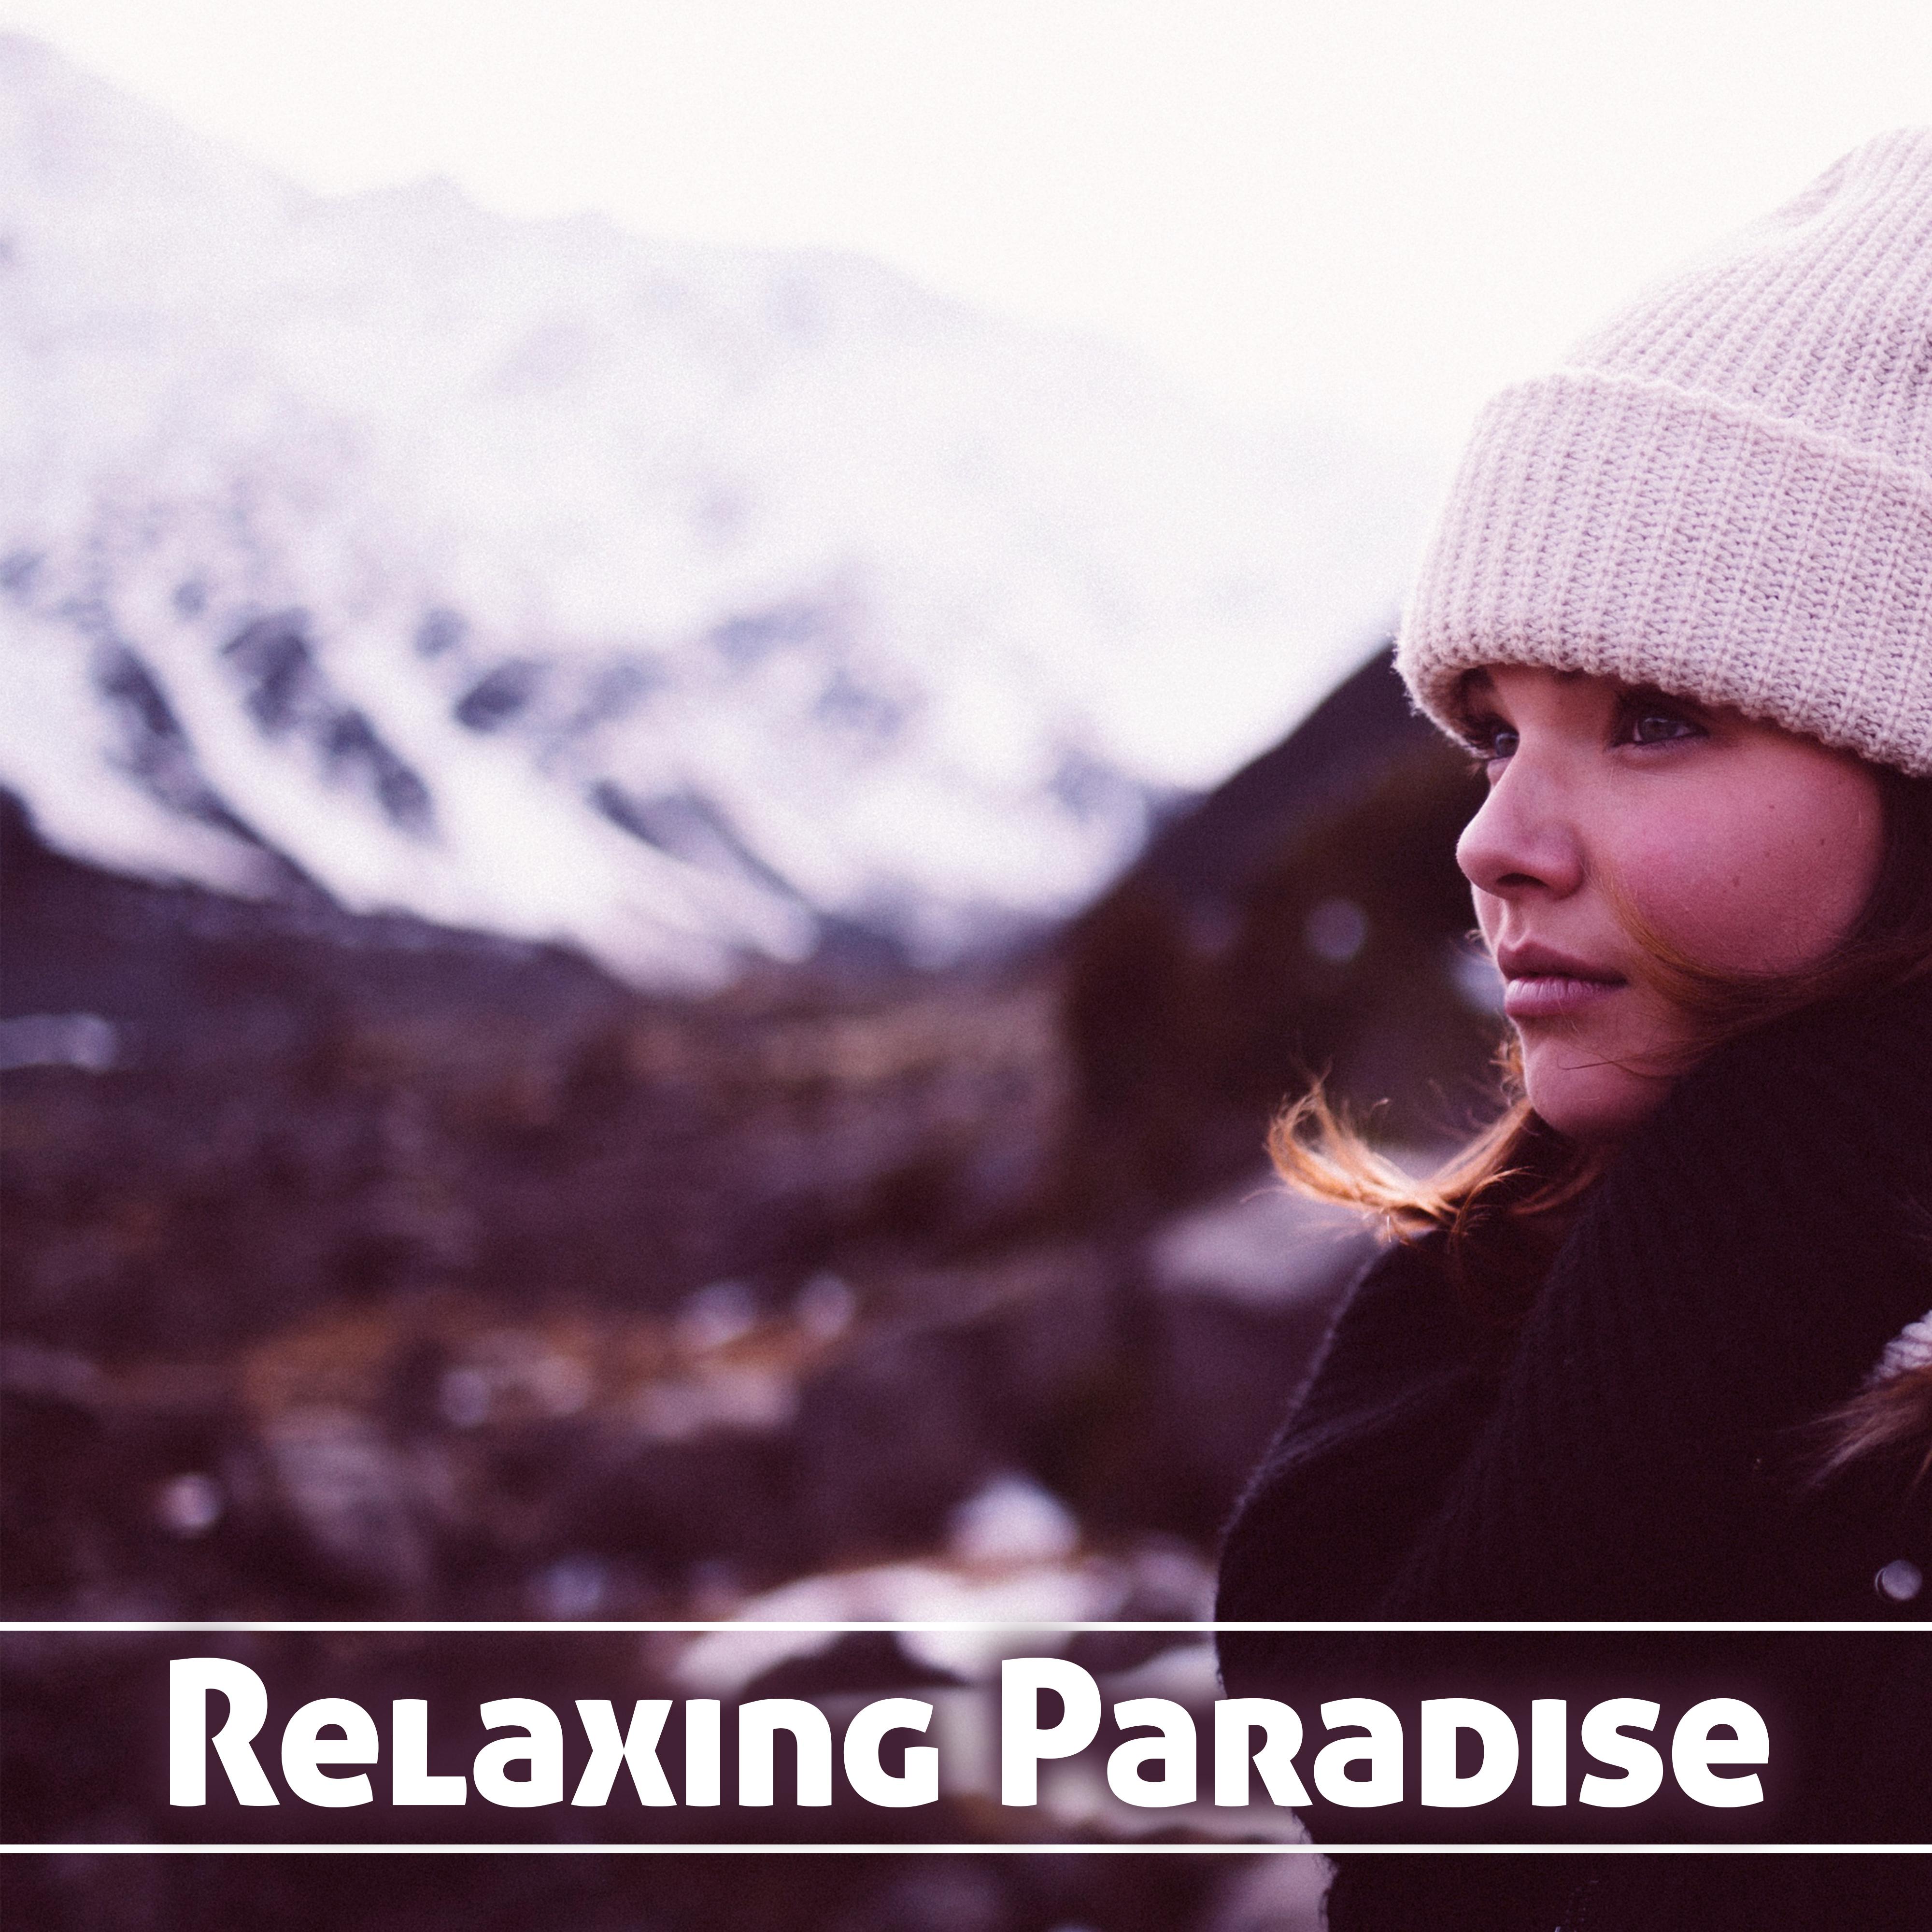 Relaxing Paradise  Music for Spa, Massage Parlour, Music For Massage Treatments, Spa, Wellness, Relax